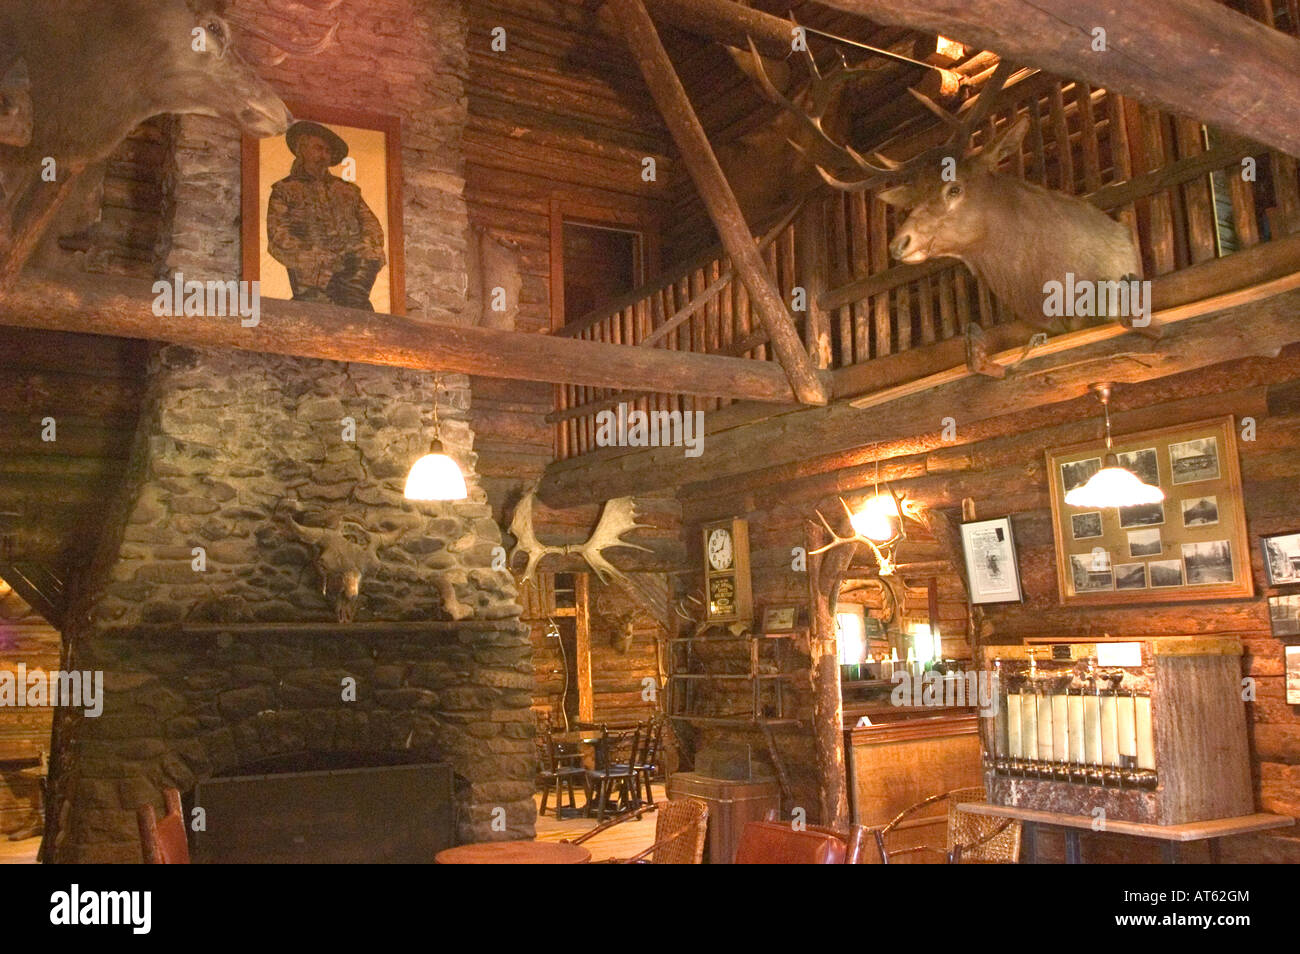 Bill's hunting lodge, Pahaska Tepee, is a log cabin accommodation not far from Cody, WY Stock Photo - Alamy